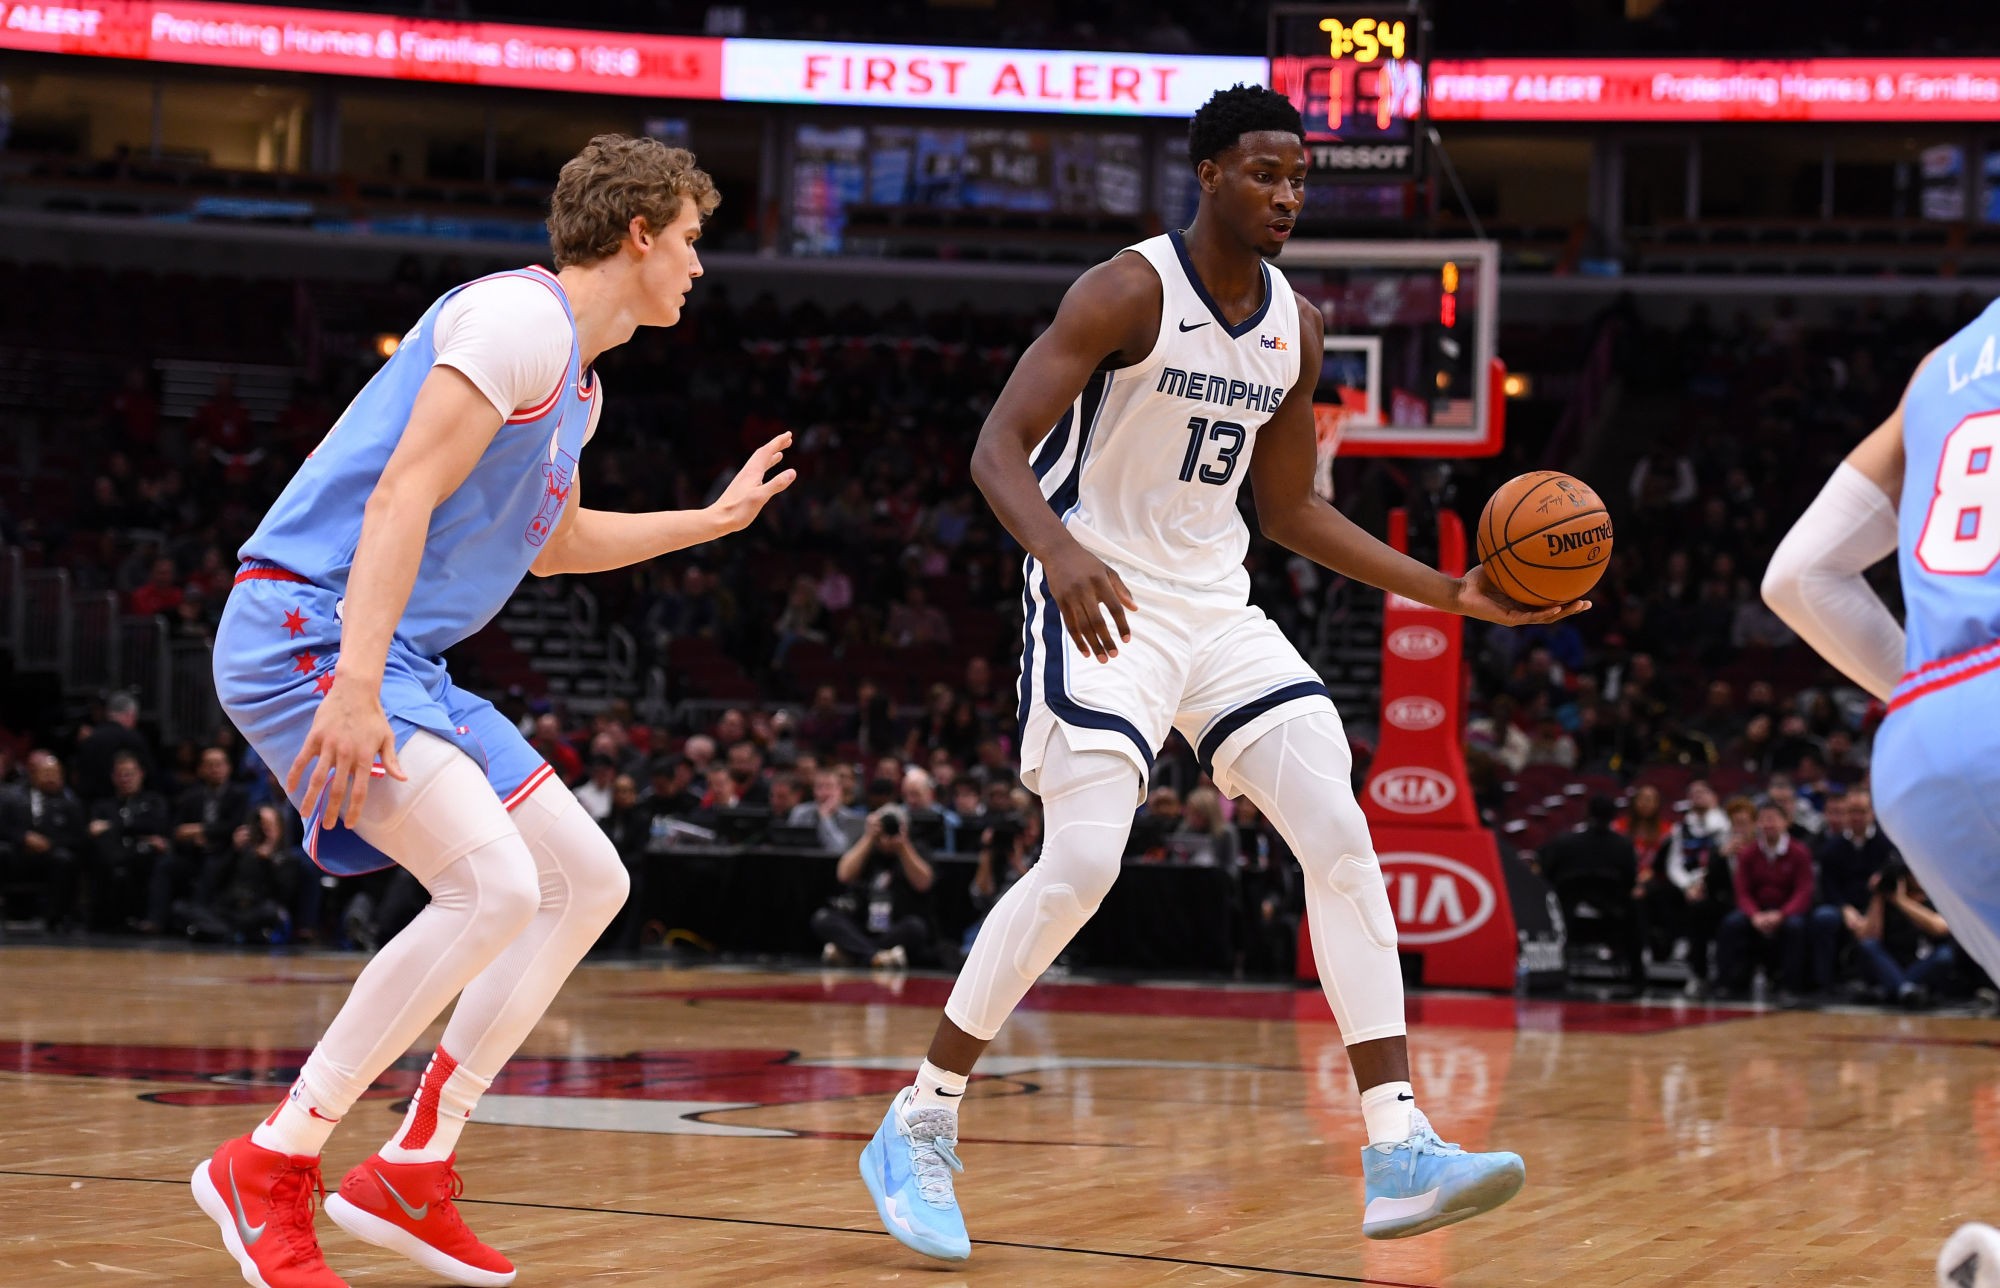 Dec 4, 2019; Chicago, IL, USA; Memphis Grizzlies forward Jaren Jackson Jr. (13) dribbles the ball against Chicago Bulls forward Lauri Markkanen (24) during the first half at the United Center. Mandatory Credit: Mike DiNovo-USA TODAY Sports/Sipa USA 

Photo by Icon Sport - Jaren JACKSON JR. - Lauri MARKKANEN - United Center - Chicago (Etats Unis)